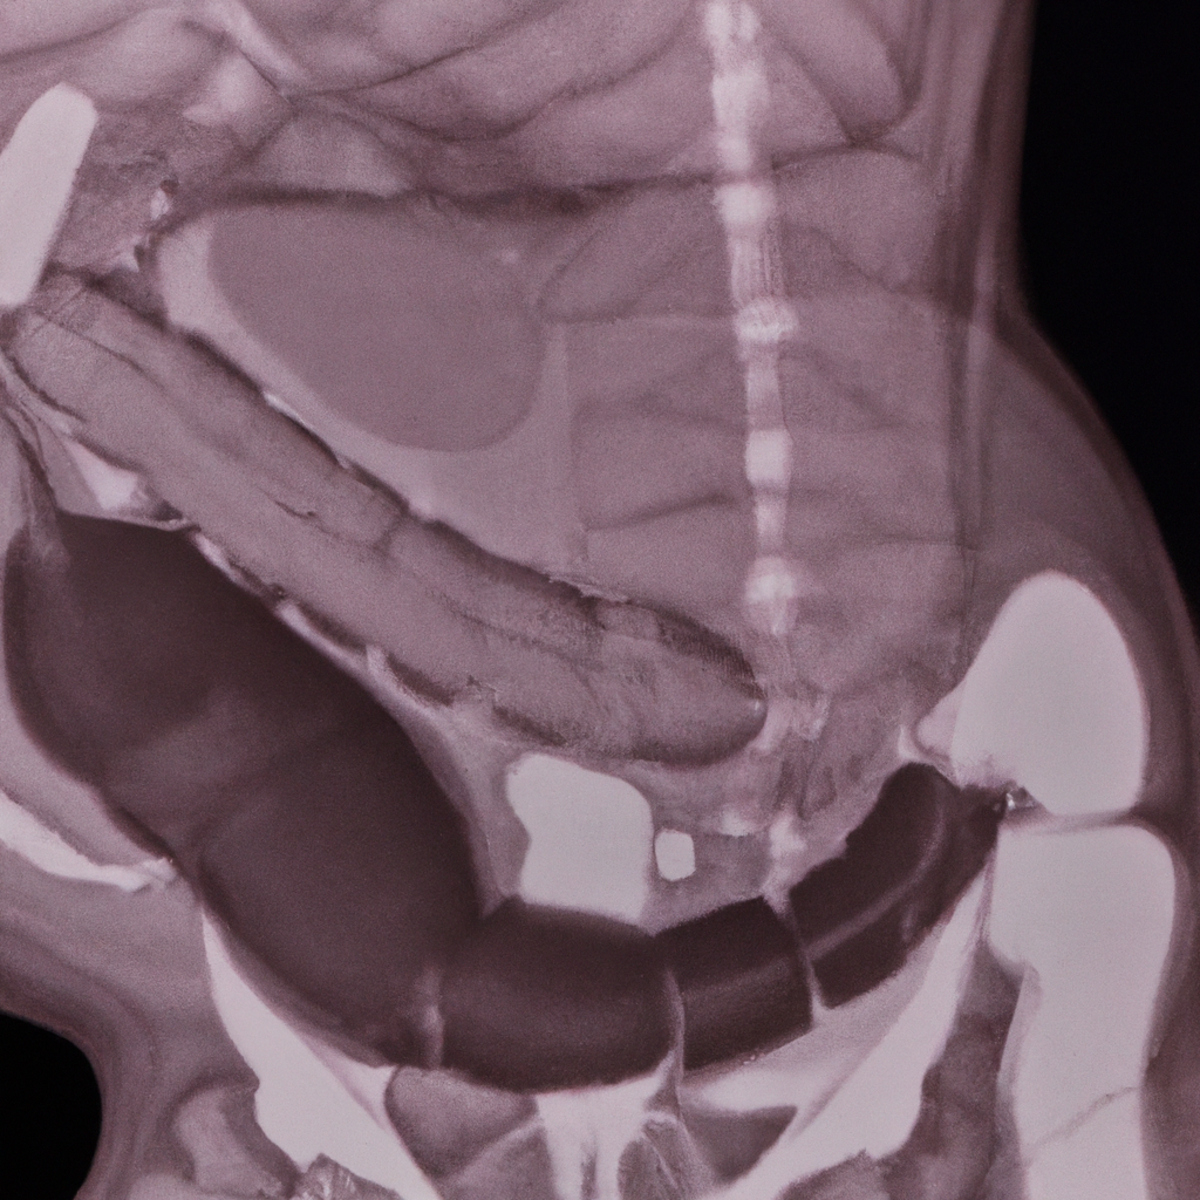 Close-up of healthy human abdomen with fully formed pancreas. Arrows highlight rare annular pancreas, surrounded by stomach and intestines. Detailed examination aids understanding of this medical condition.